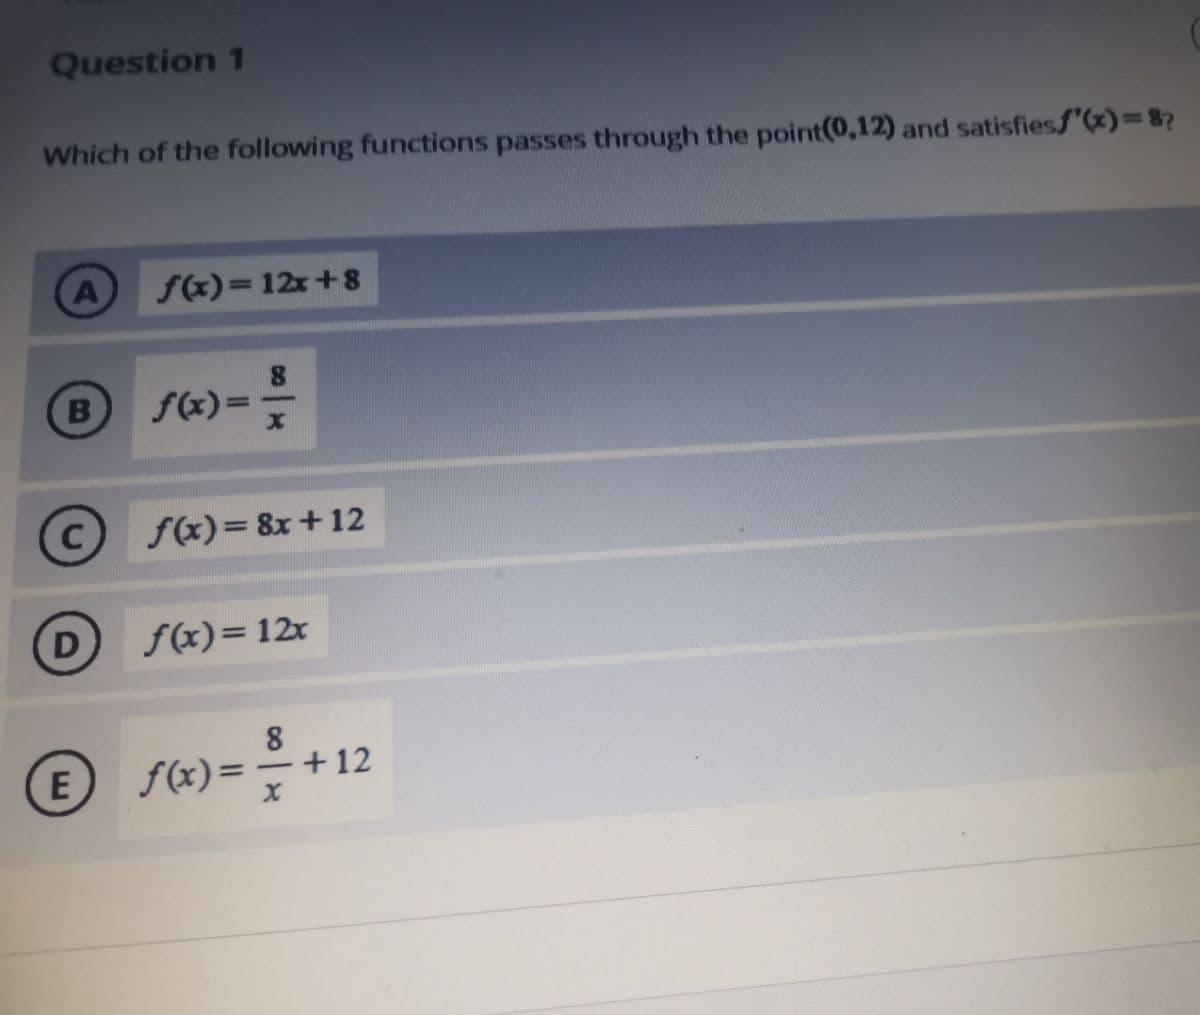 Question 1
Which of the following functions passes through the point(0,12) and satisfiesf"(x)=8?
A
f(x)= 12x+8
f(x)=
f(x)= 8x+12
D
f(x)=12x
8.
E f(x)=+12
